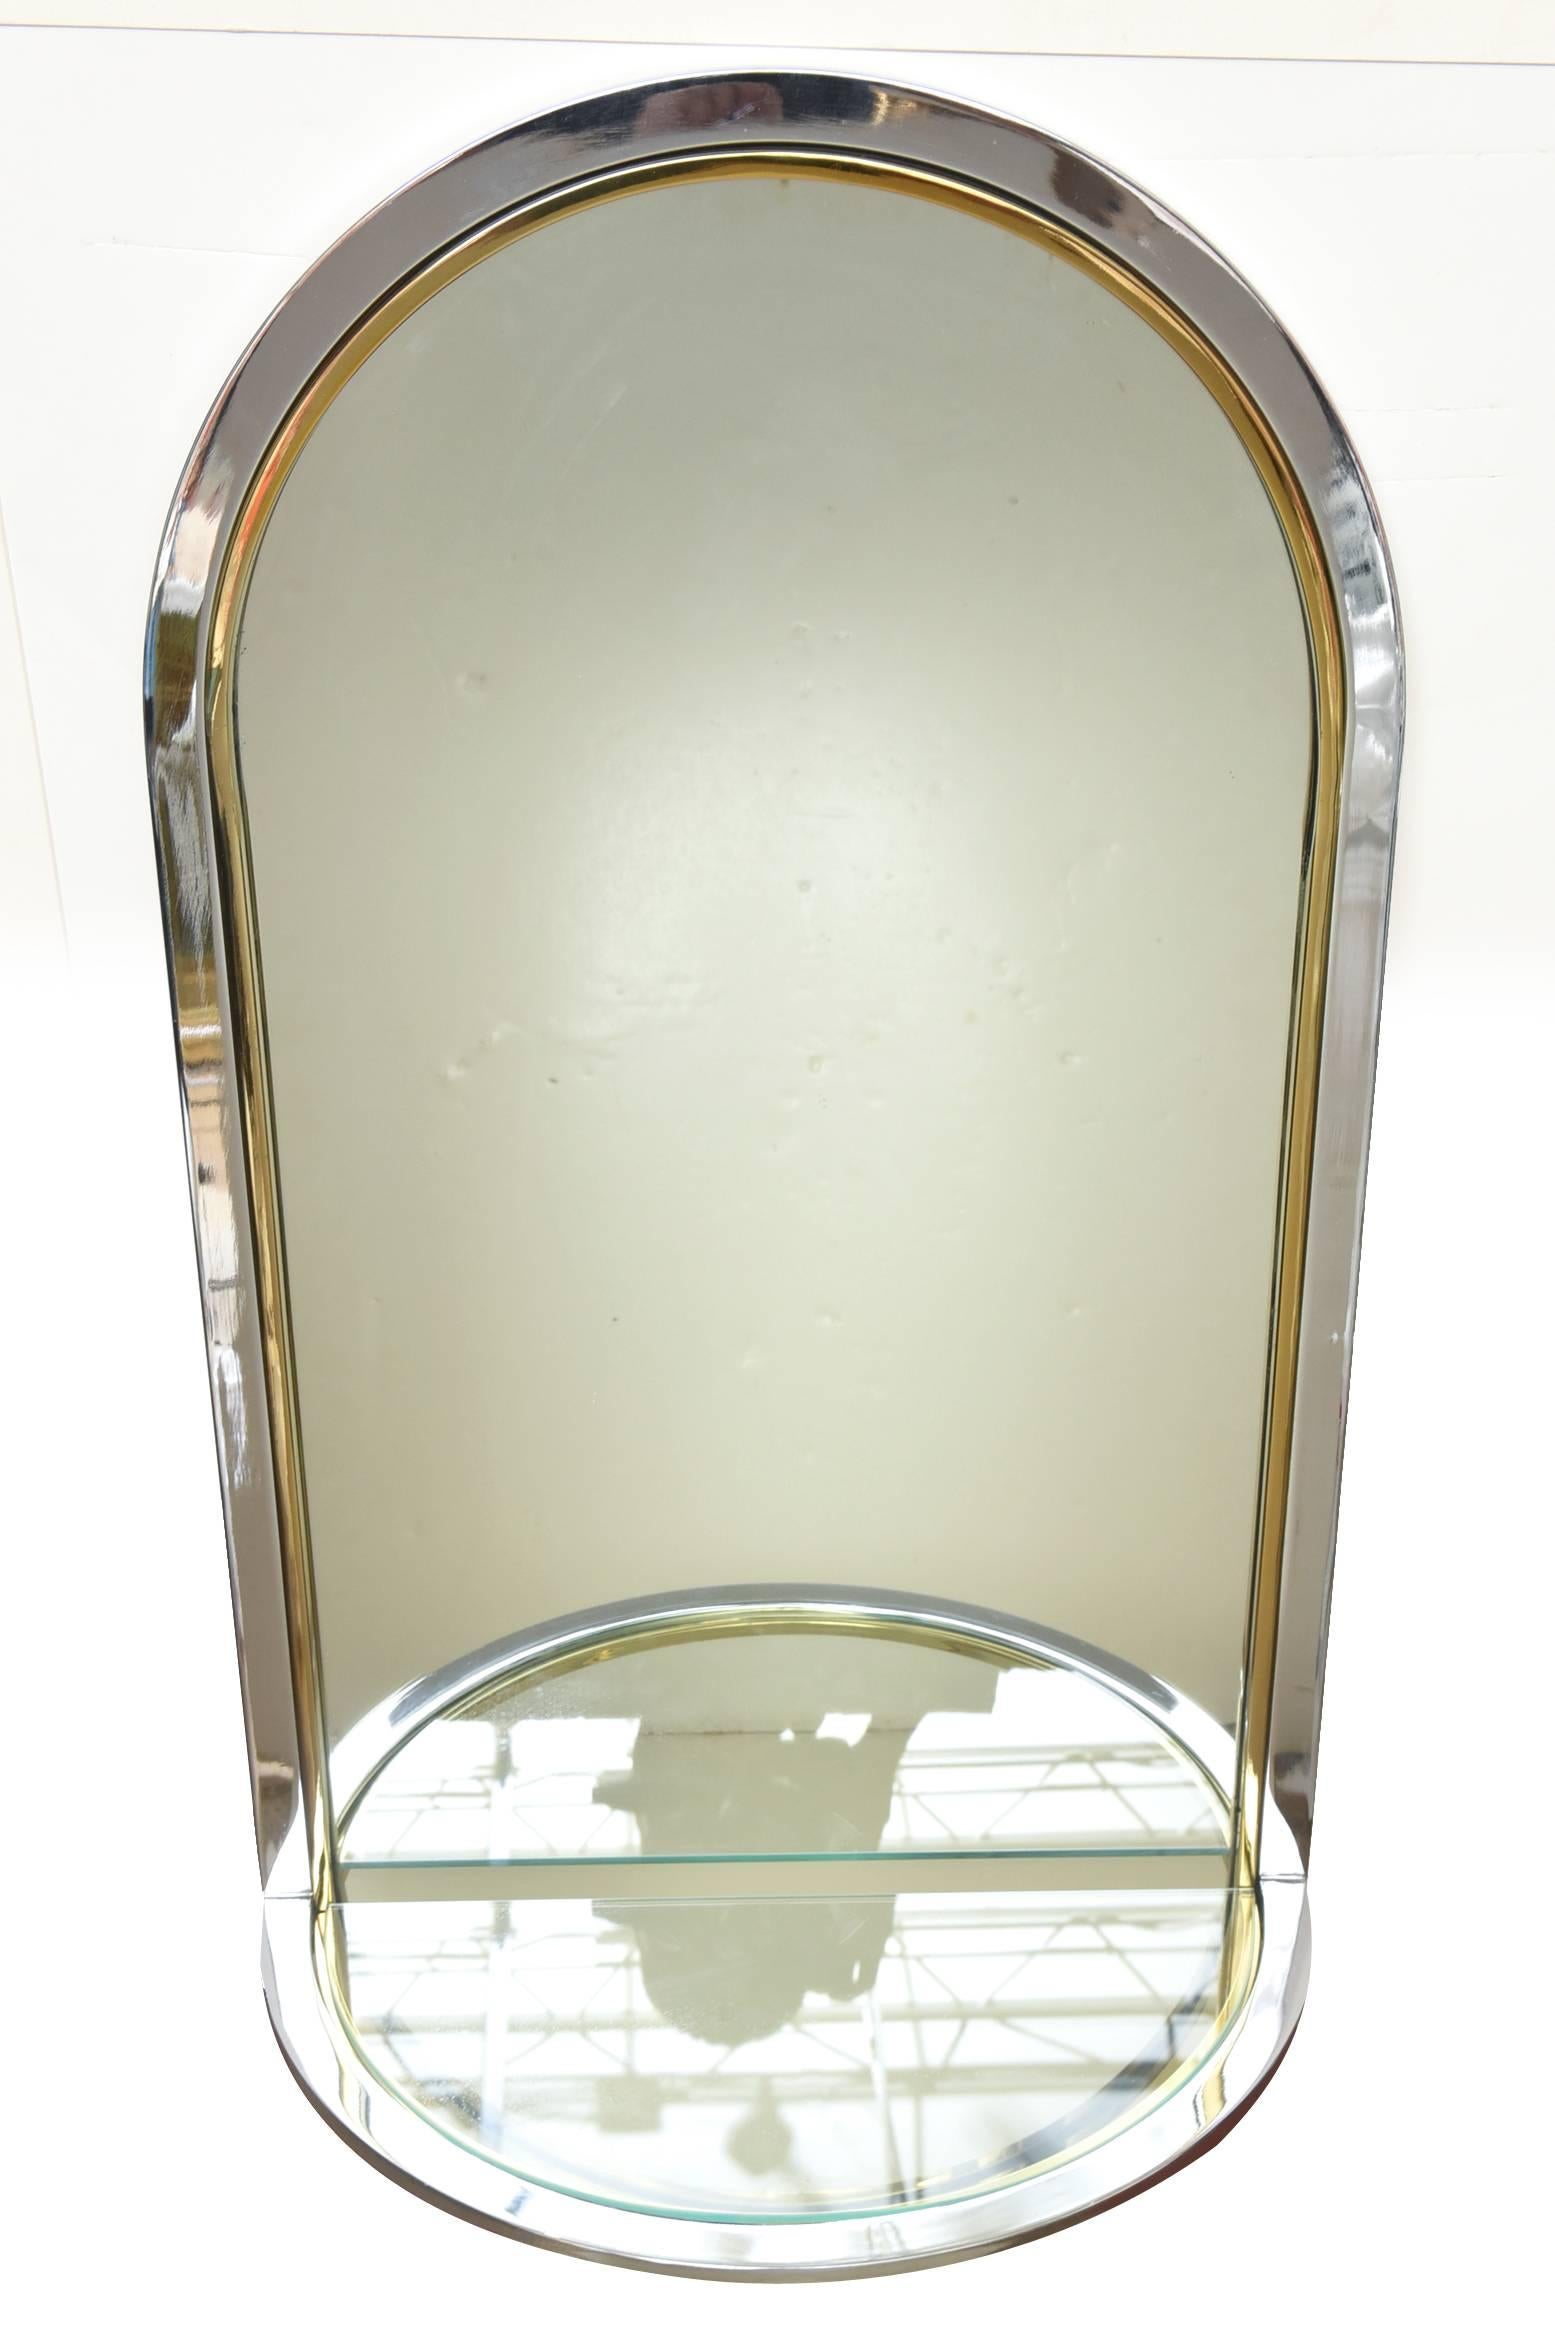 This wonderful and versatile vintage arched wall dual metal mirror by the Pace Collection has a demilune console glass shelf. It has been professionally polished and the materials are chrome on the outside and brass-plated accent banding on the